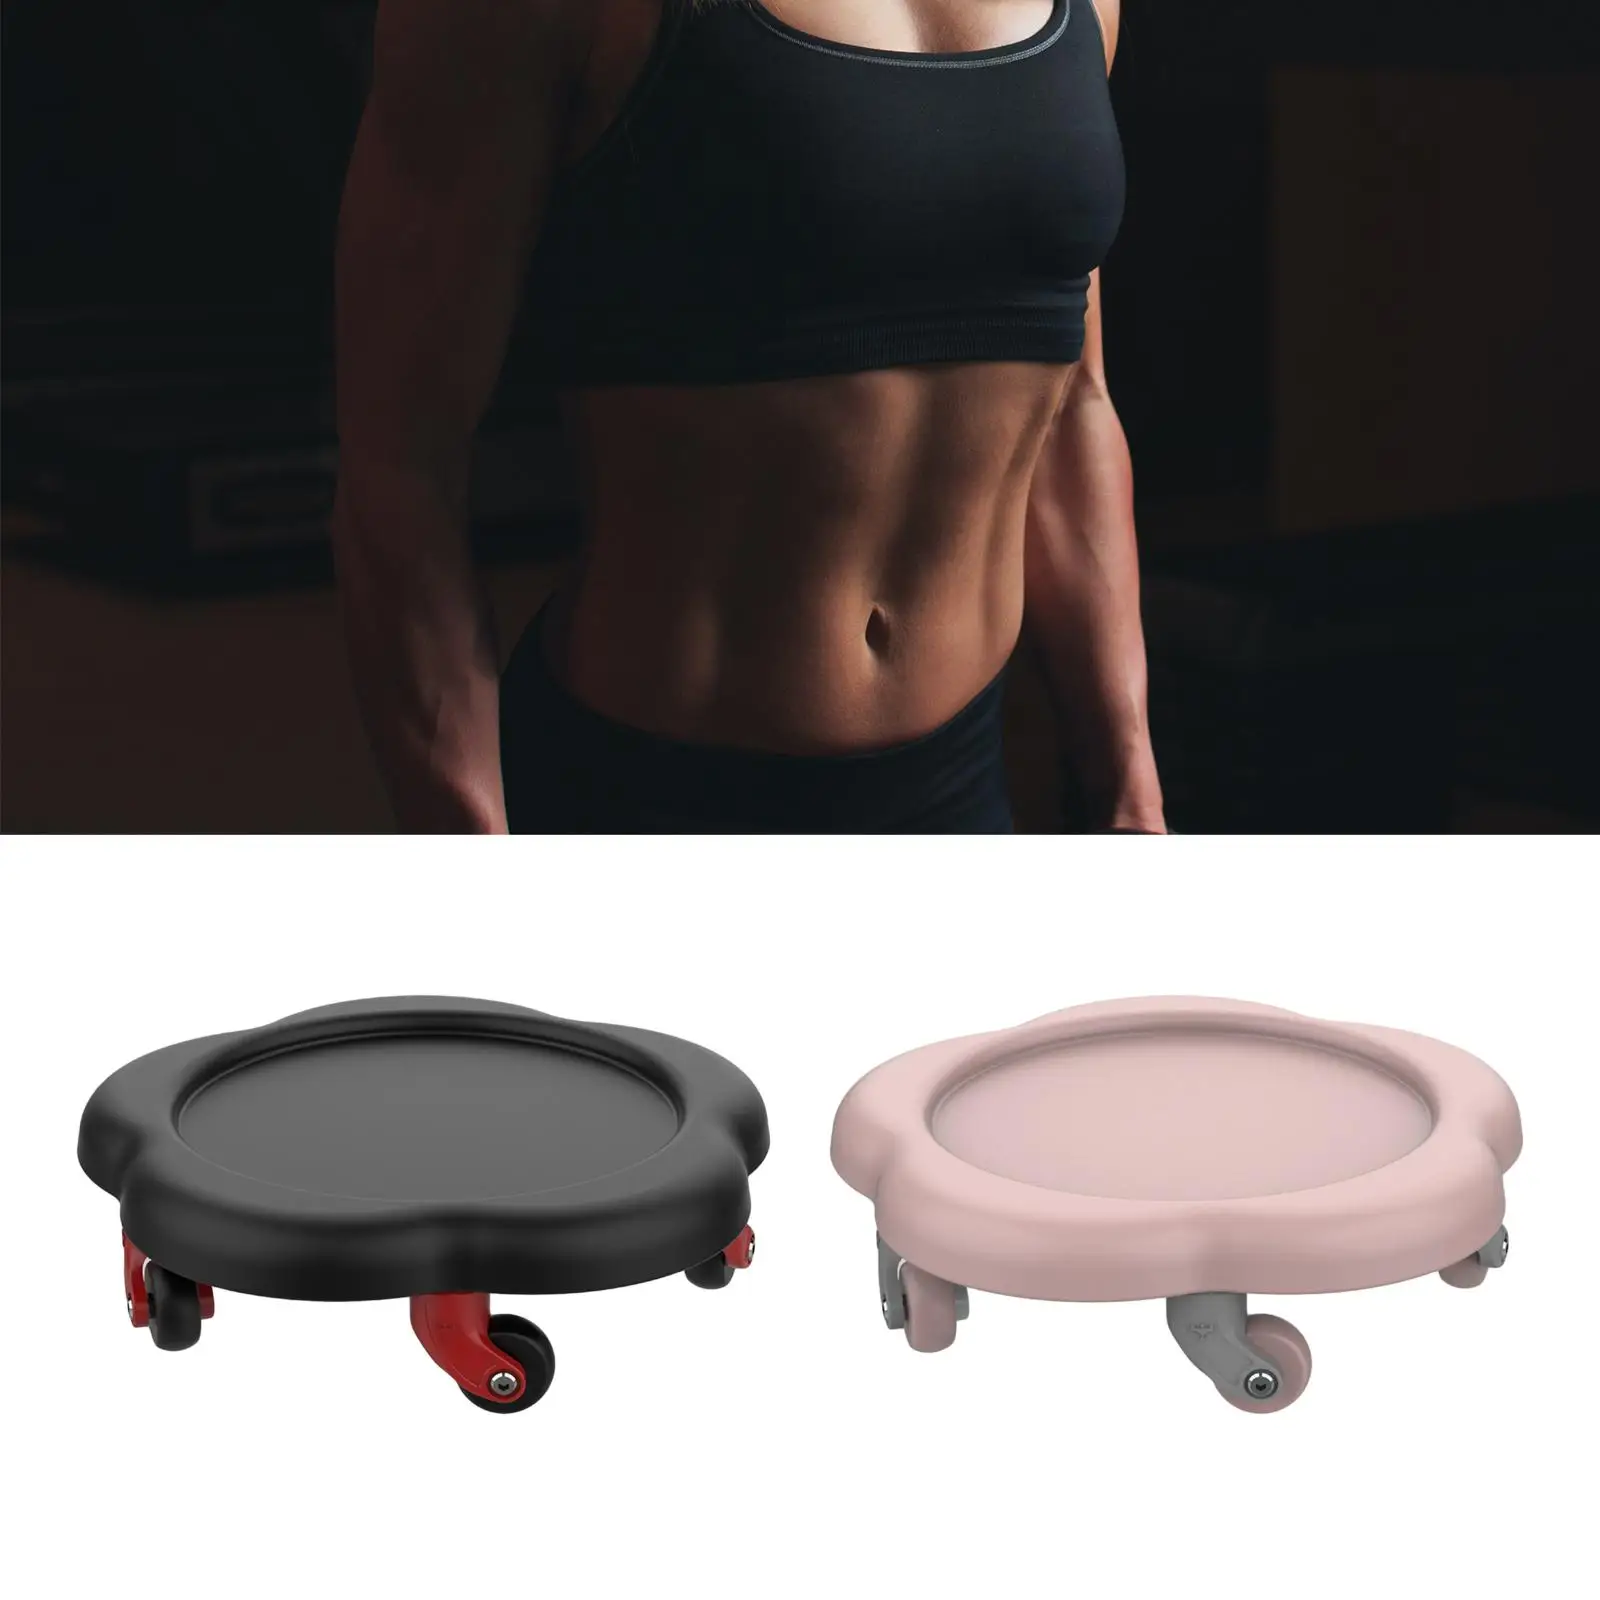 Five Wheels Abdominal Disc Body Building Easy to Use Non Slip for Exercise